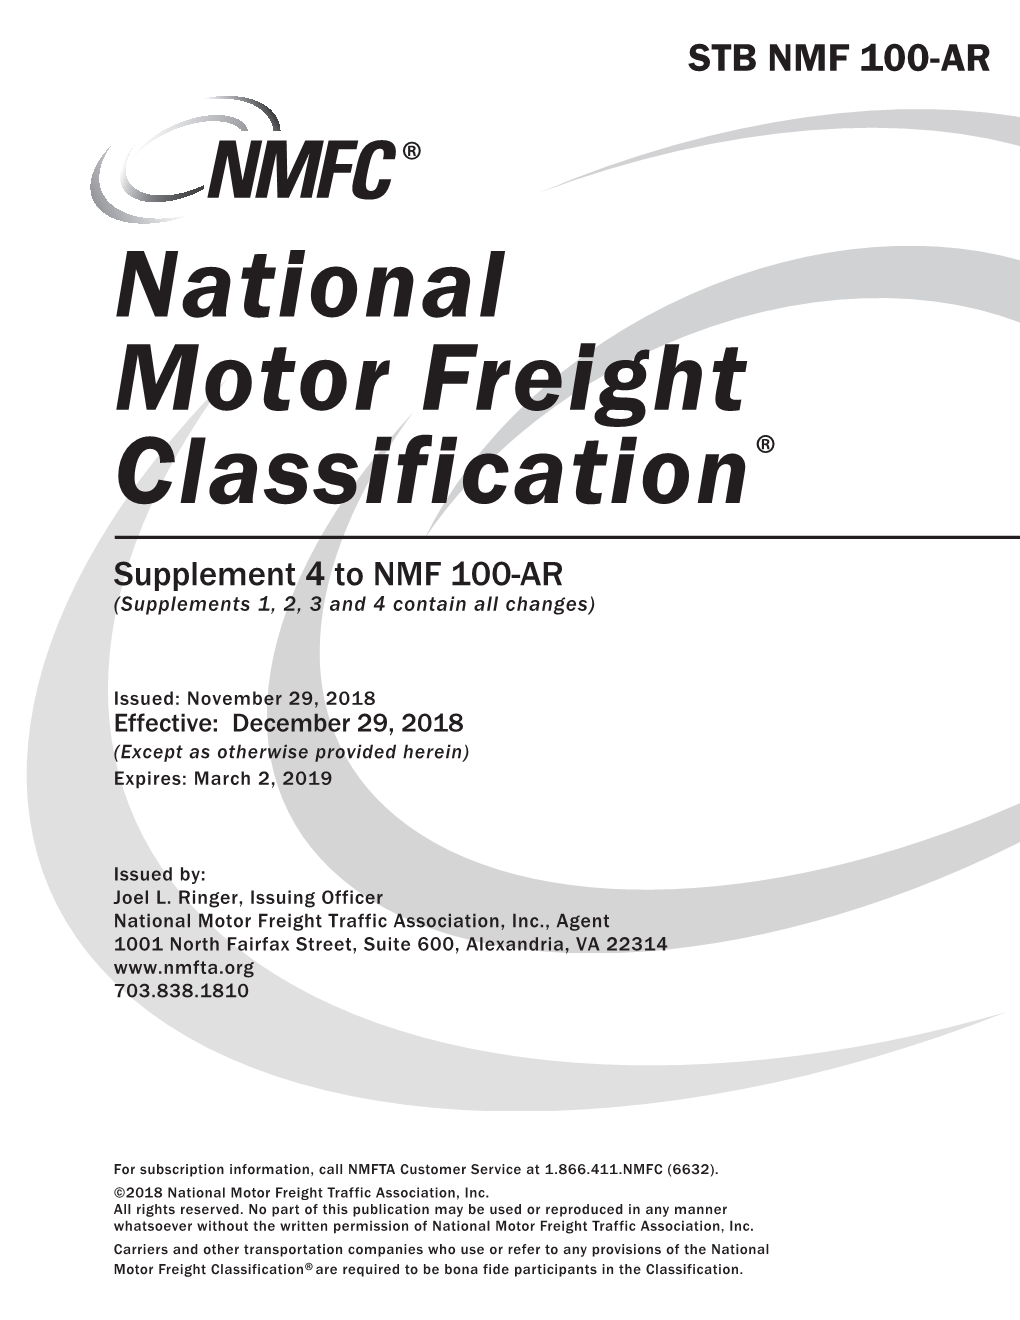 National Motor Freight Classification® Supplement 4 to NMF 100-AR (Supplements 1, 2, 3 and 4 Contain All Changes)